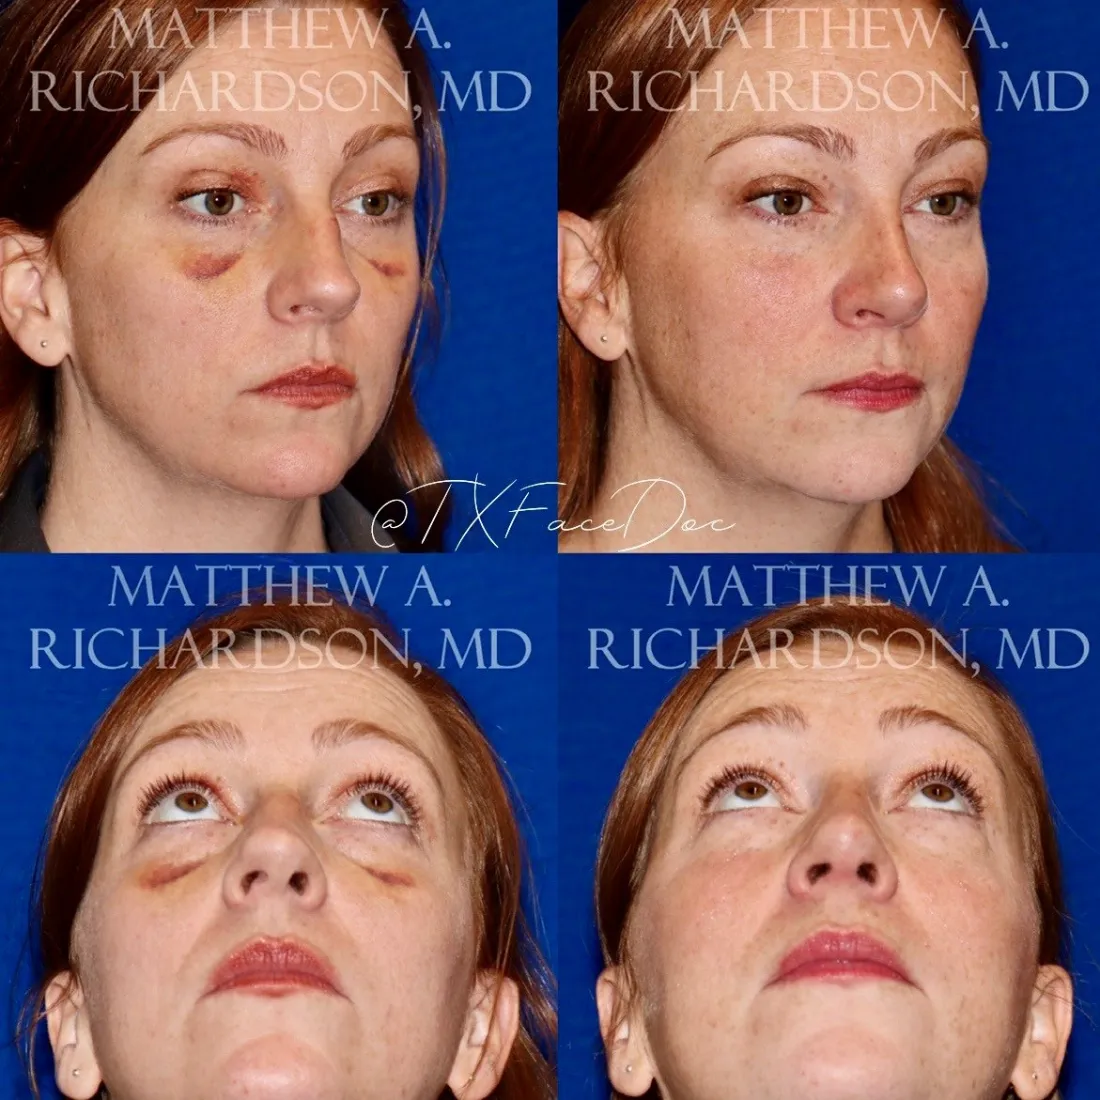 Rhinoplasty before and after performed by Matthew A. Richardson, MD